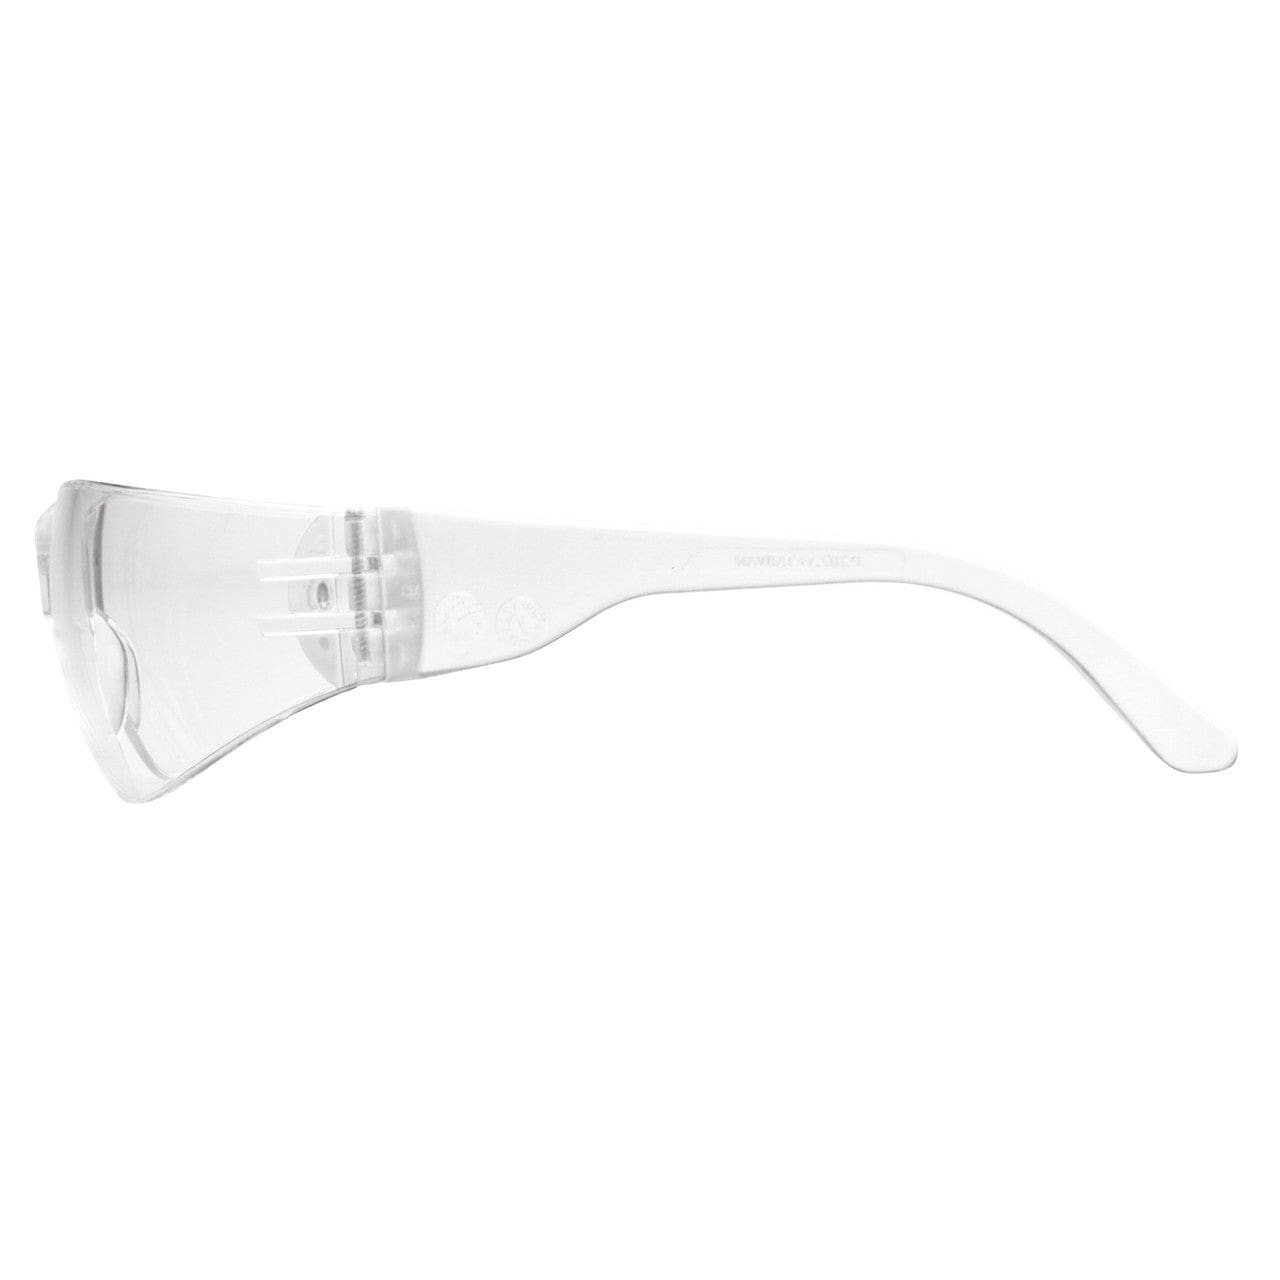 Pyramex S4110SUC Intruder Safety Glasses Side View